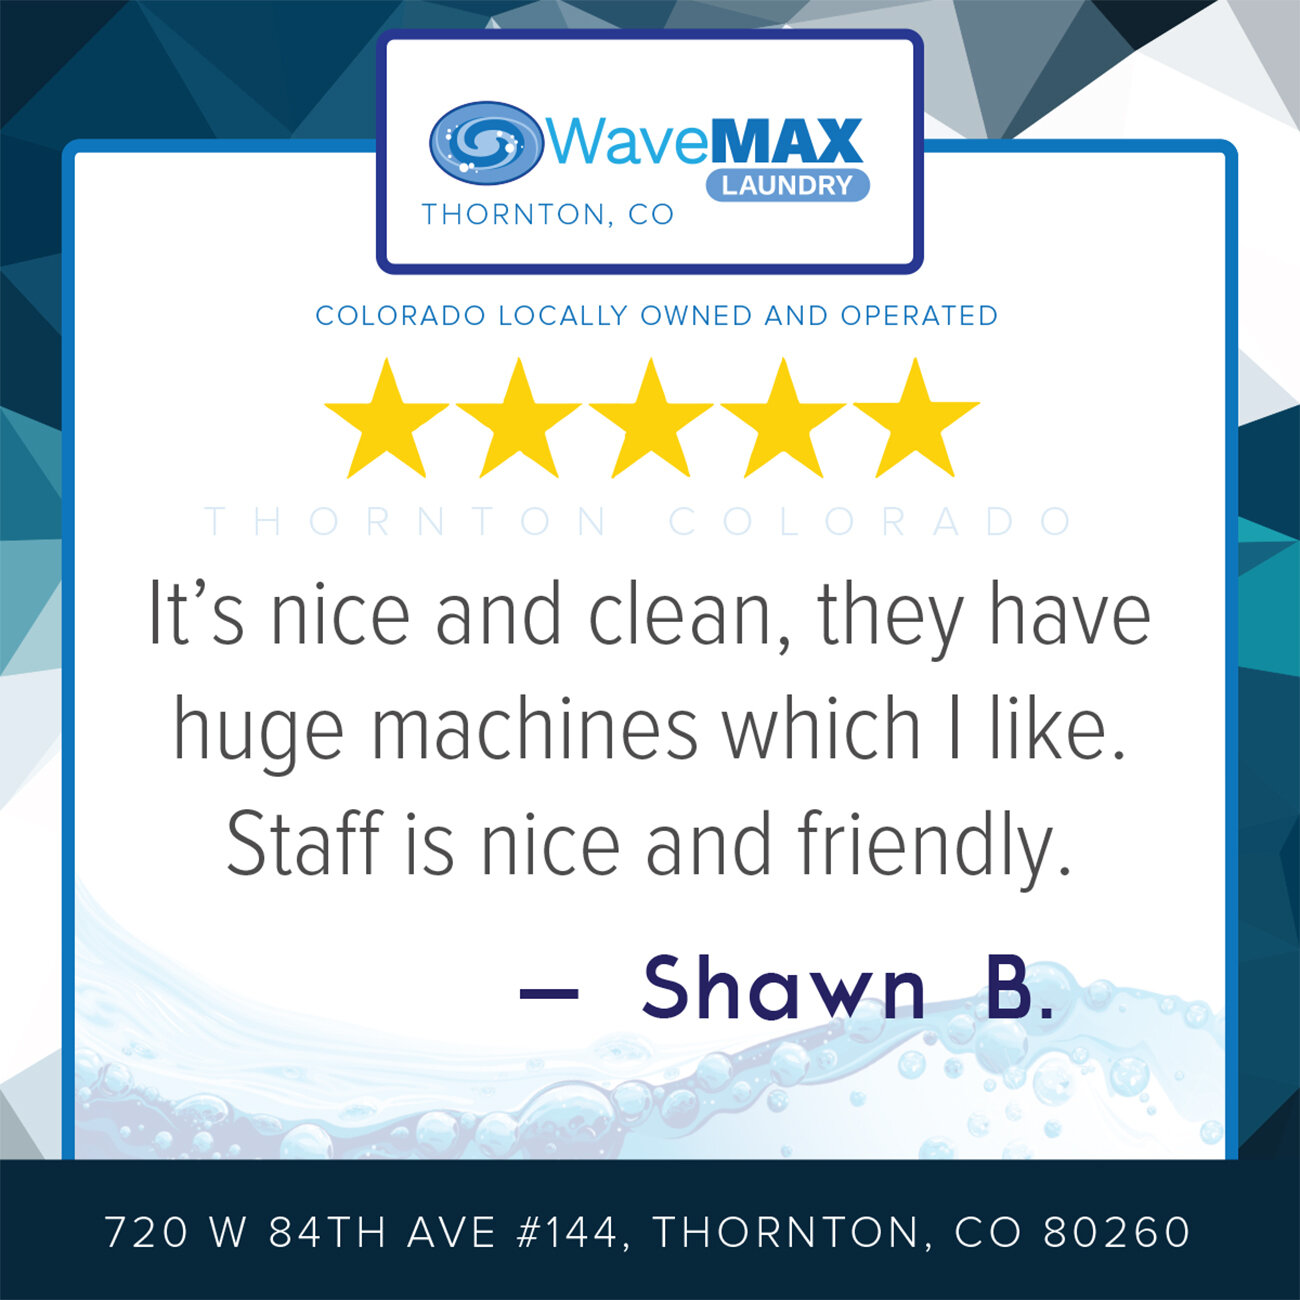 Thank you for trying our large machines! We love to see so many loads of laundry done in one wash. Have you had a great experience at WaveMAX Thornton? Please leave us a review or read what others have to say about WaveMAX Thornton &gt;&gt;http://bit